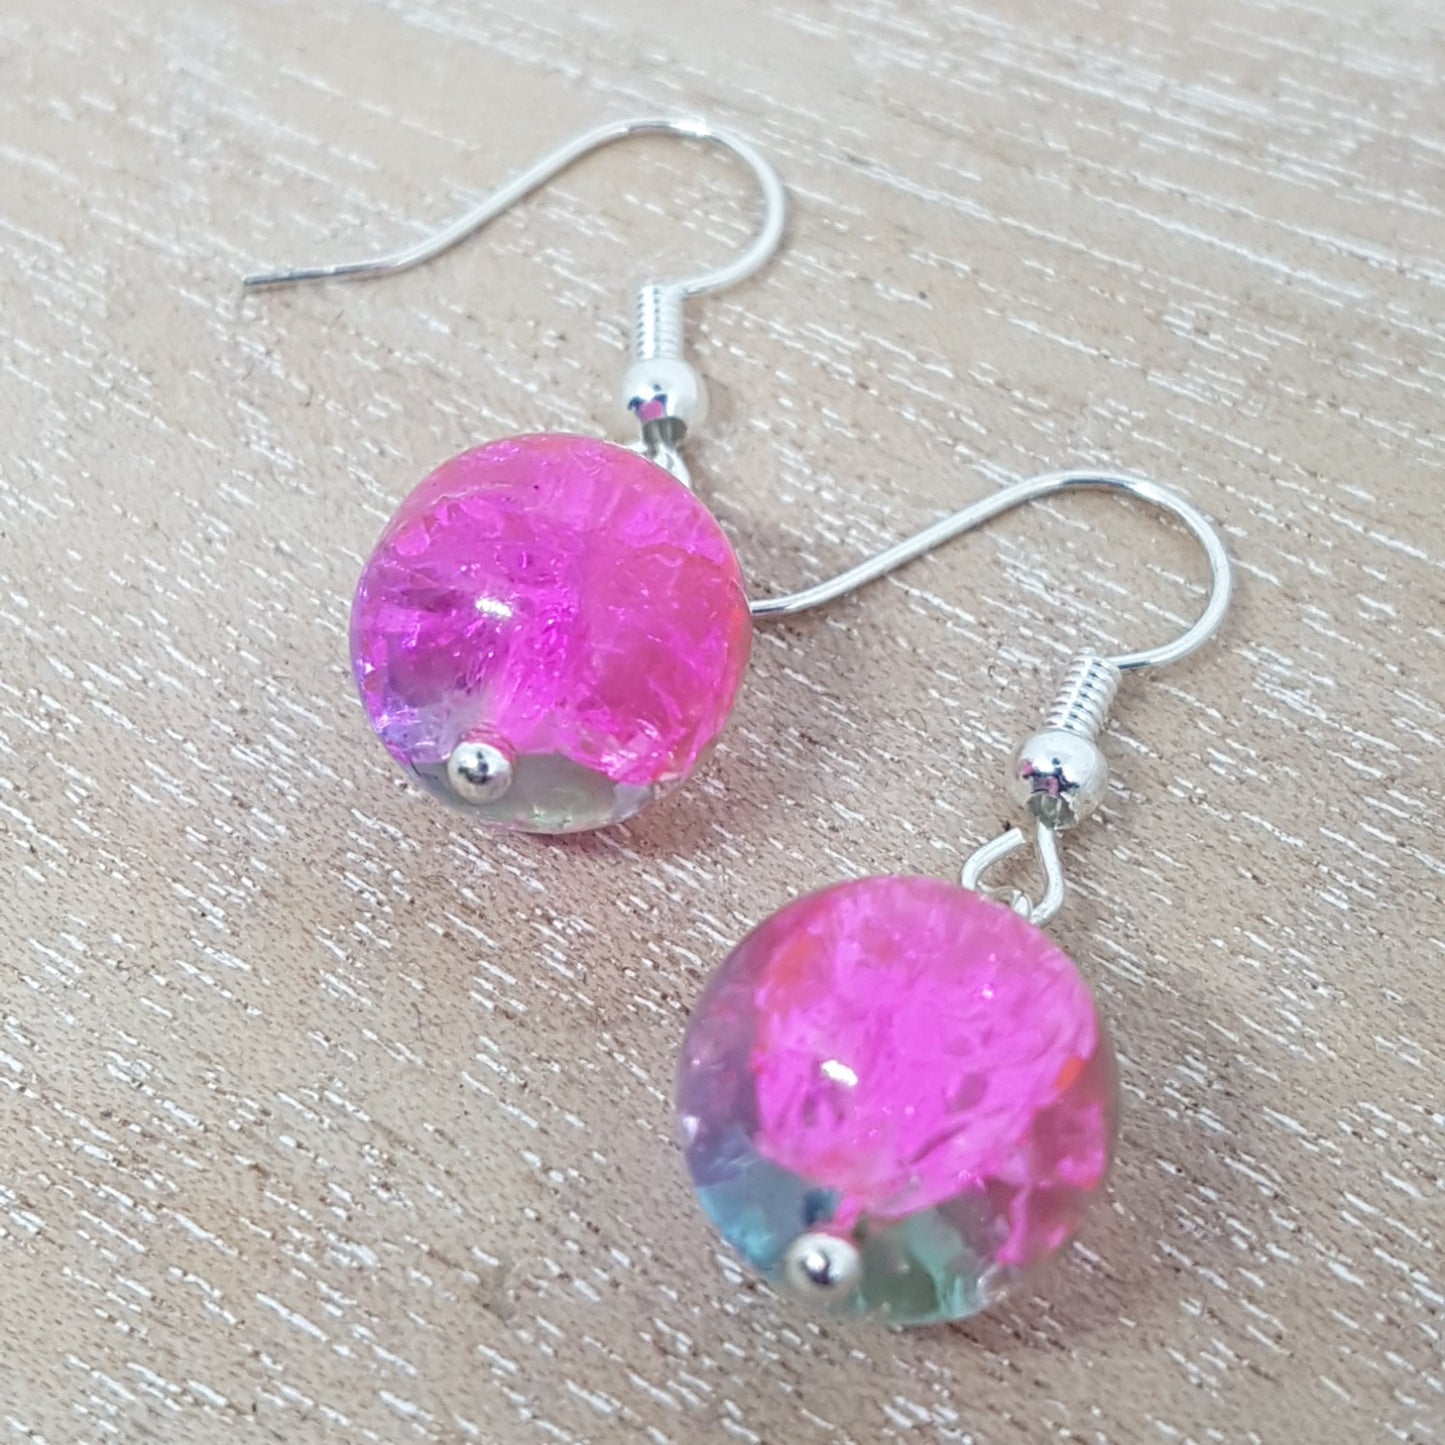 Close up of sparkly pink glass bead earrings on a wooden table.